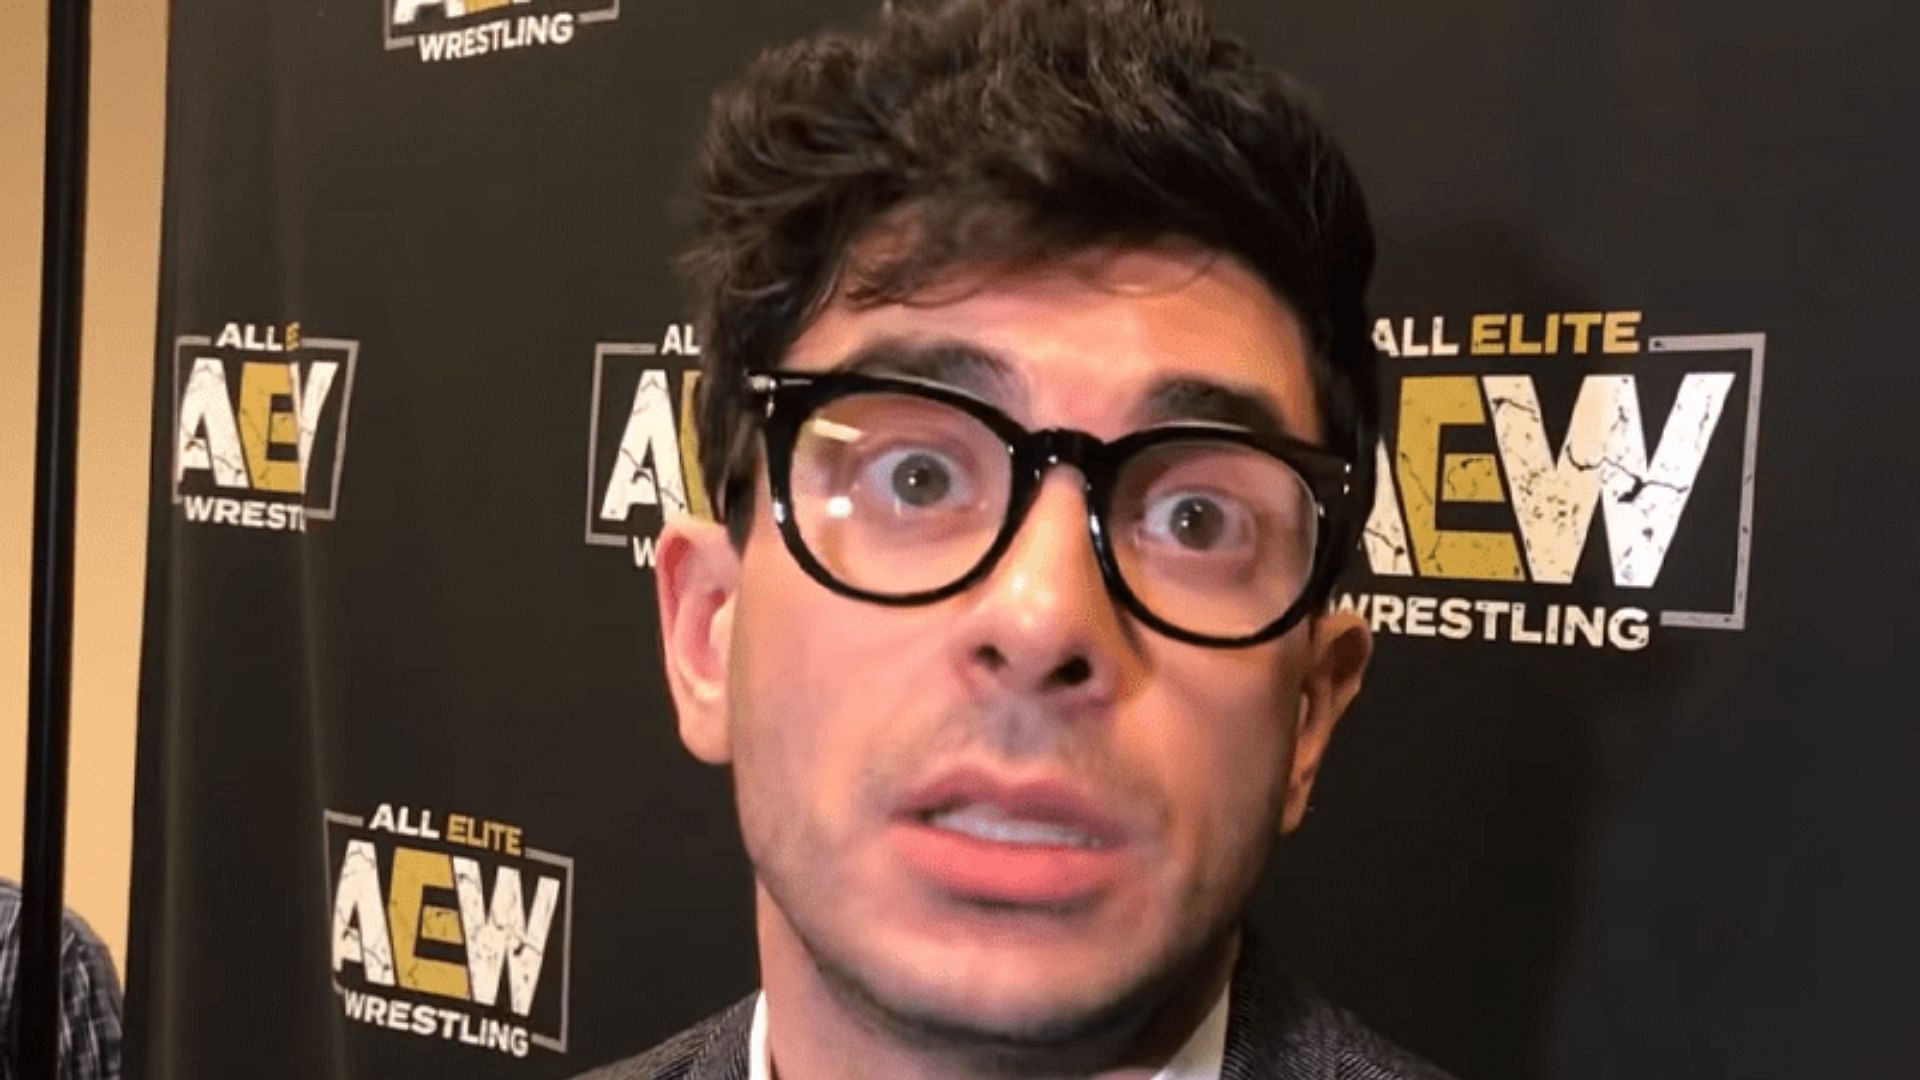 Tony Khan is the president and CEO of All Elite Wrestling